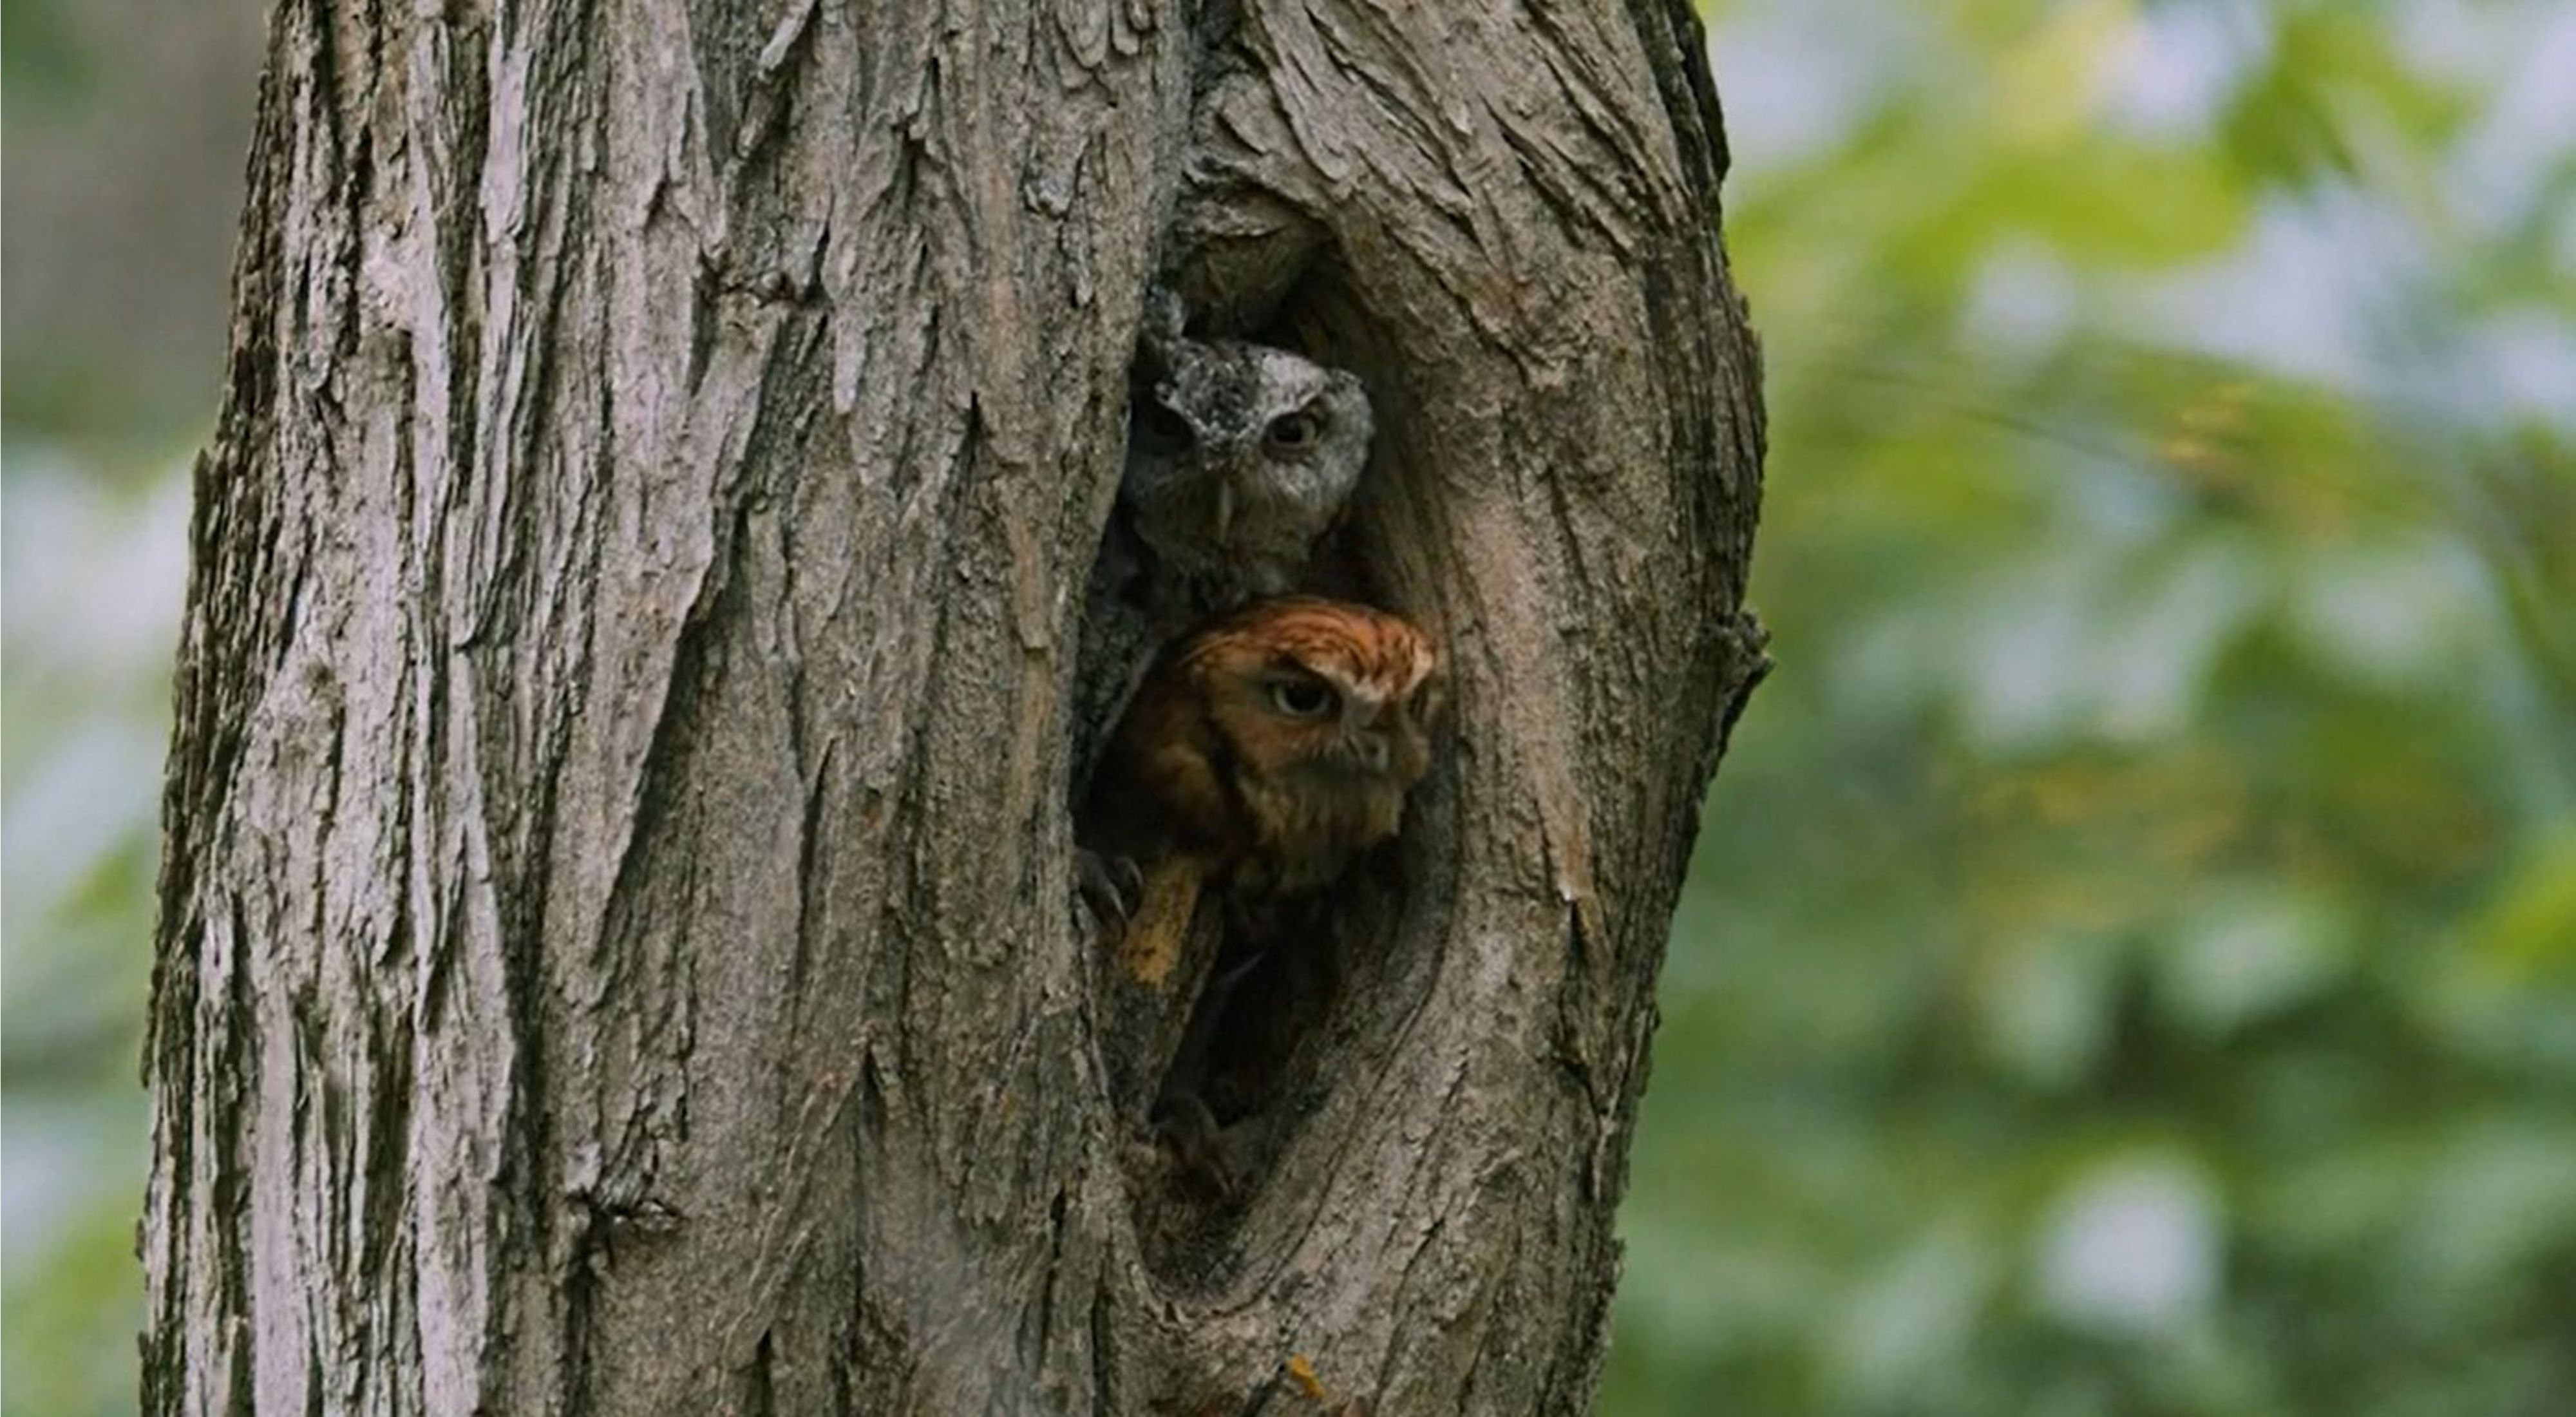 Two Eastern screech owls look out from a tree nest.